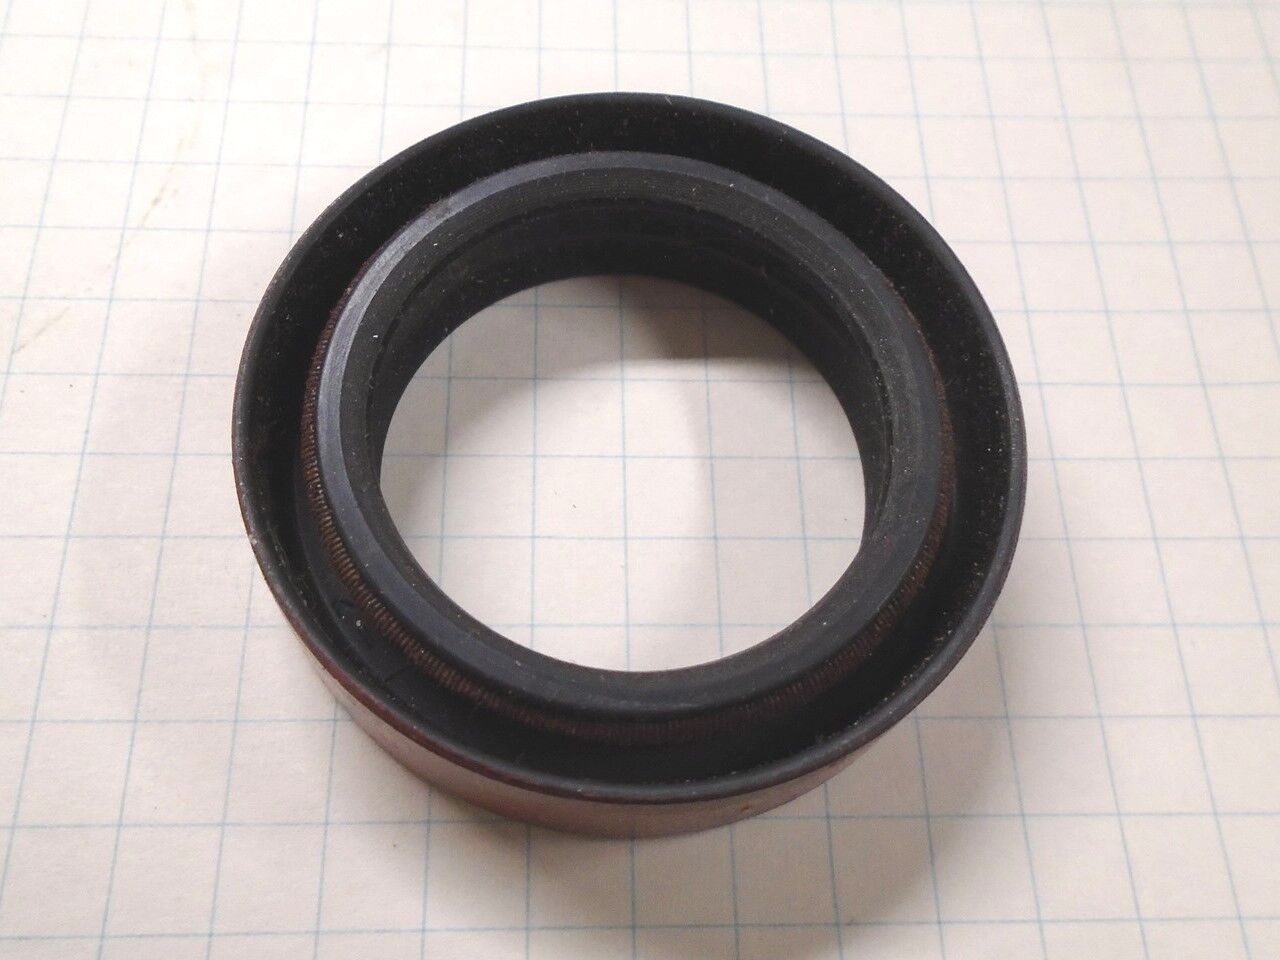 FORD PINTO TRANSMISSION OIL SEAL NATIONAL #2443 NEW OLD STOCK EXCELLENT PART WOW